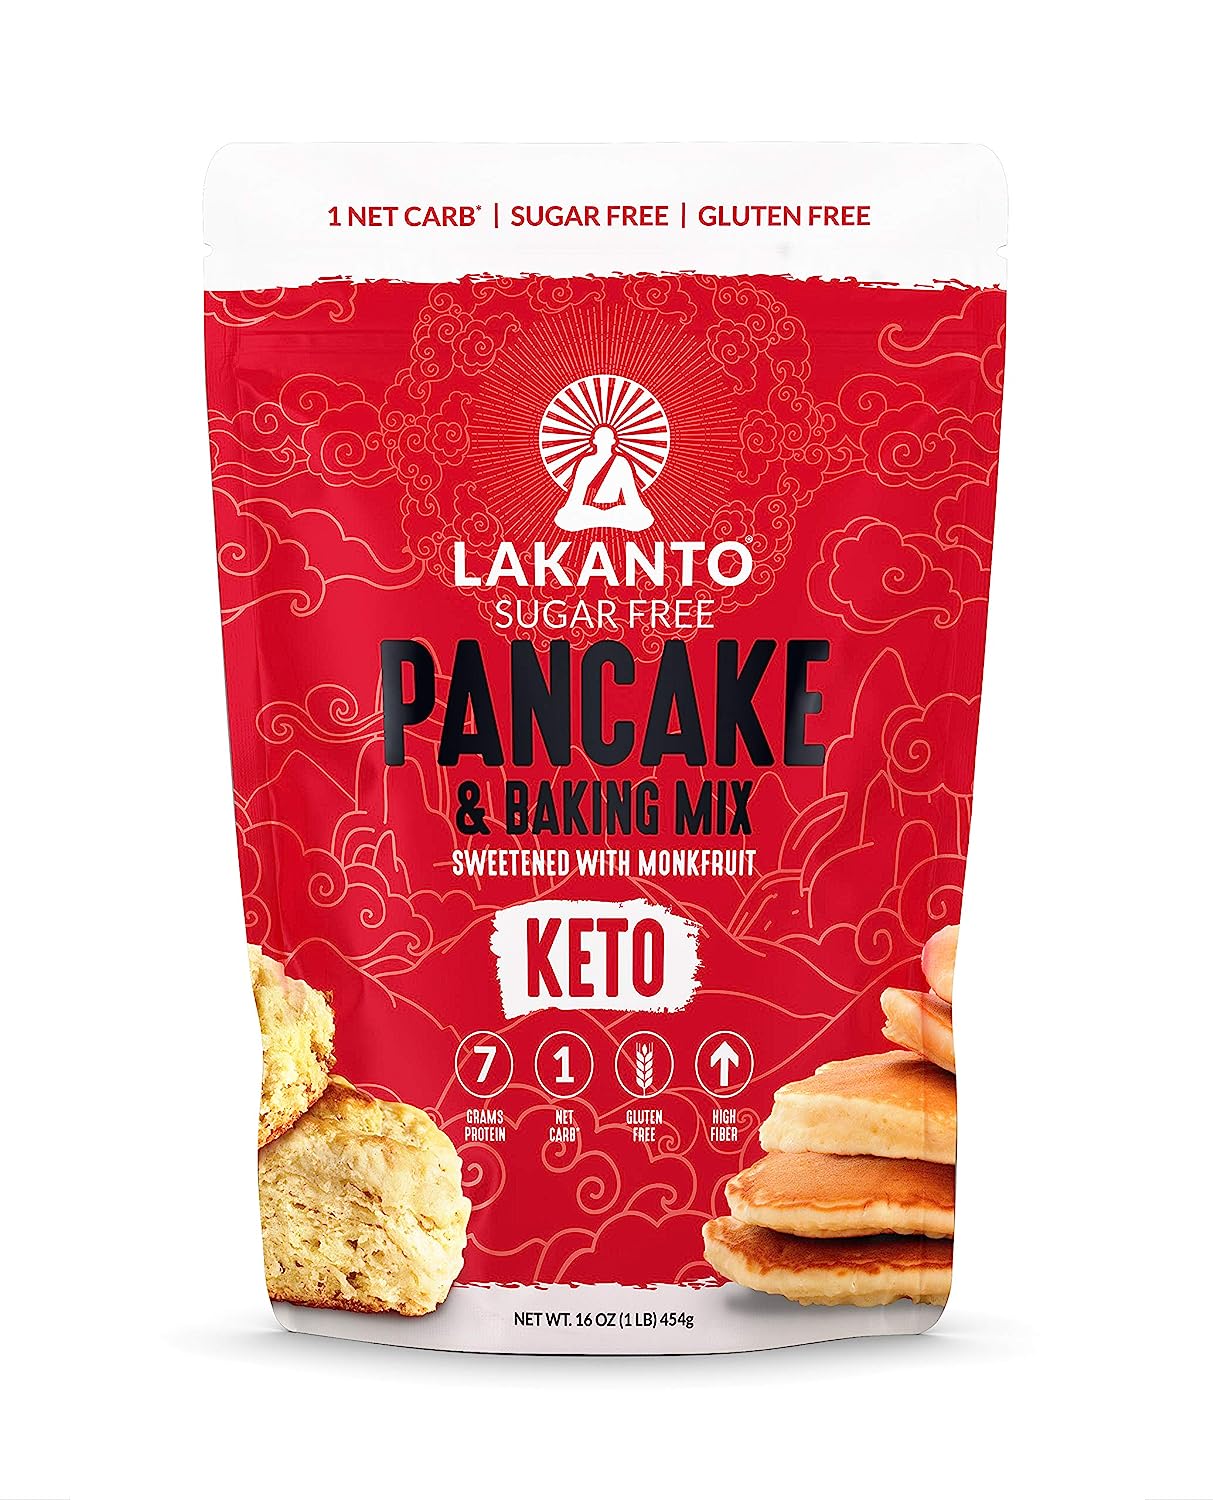 Lakanto Sugar Free Pancake and Baking Mix - Sweetened with Monk Fruit Sweetener, Keto, 7g of Protein, 1g Net Carbs, High in Fiber, Flapjack, Waffles, Biscuits, Easy to Make Breakfast (1 Lb)